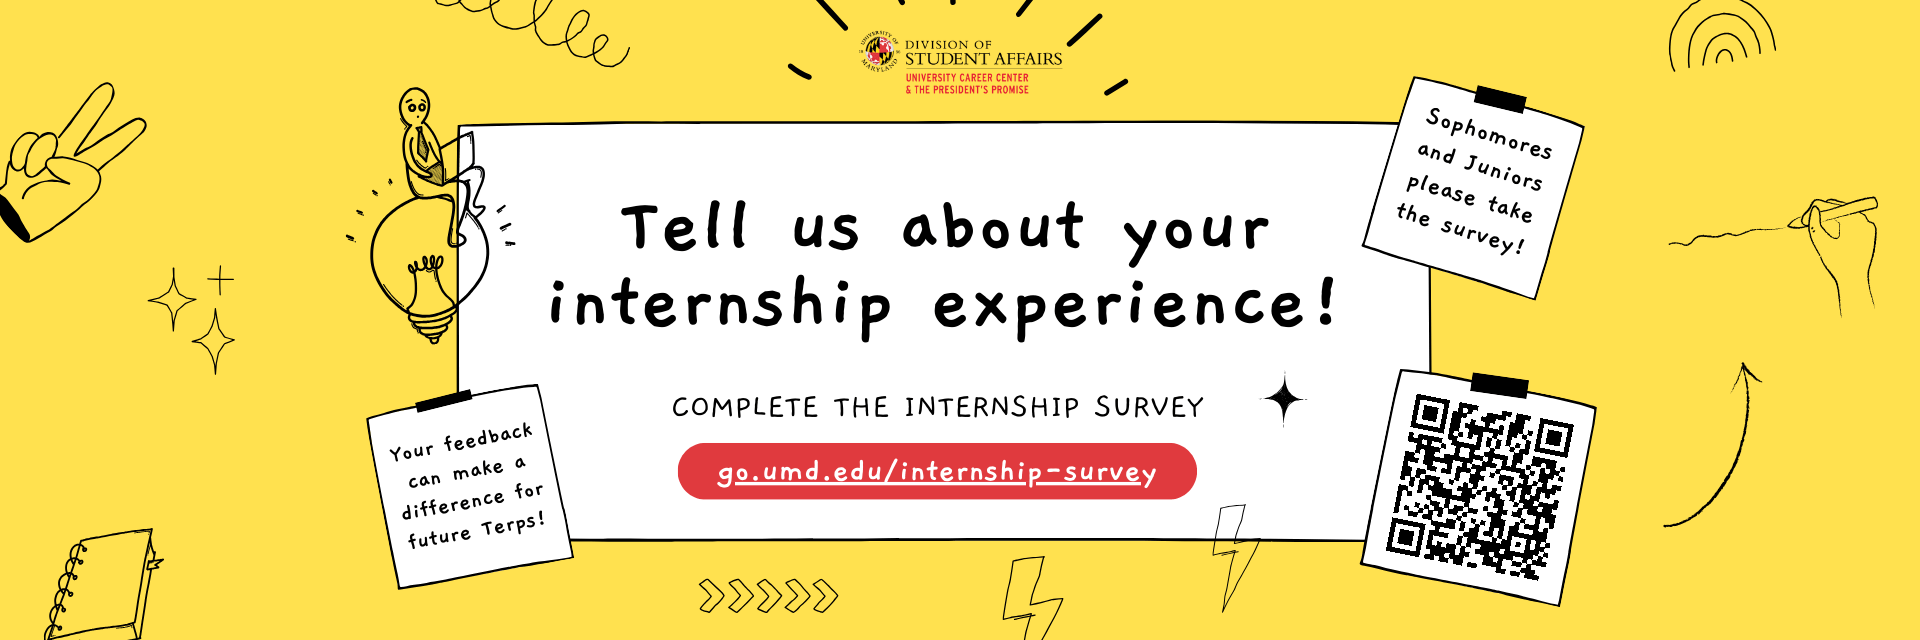 A promotional image for the internship experience survey.